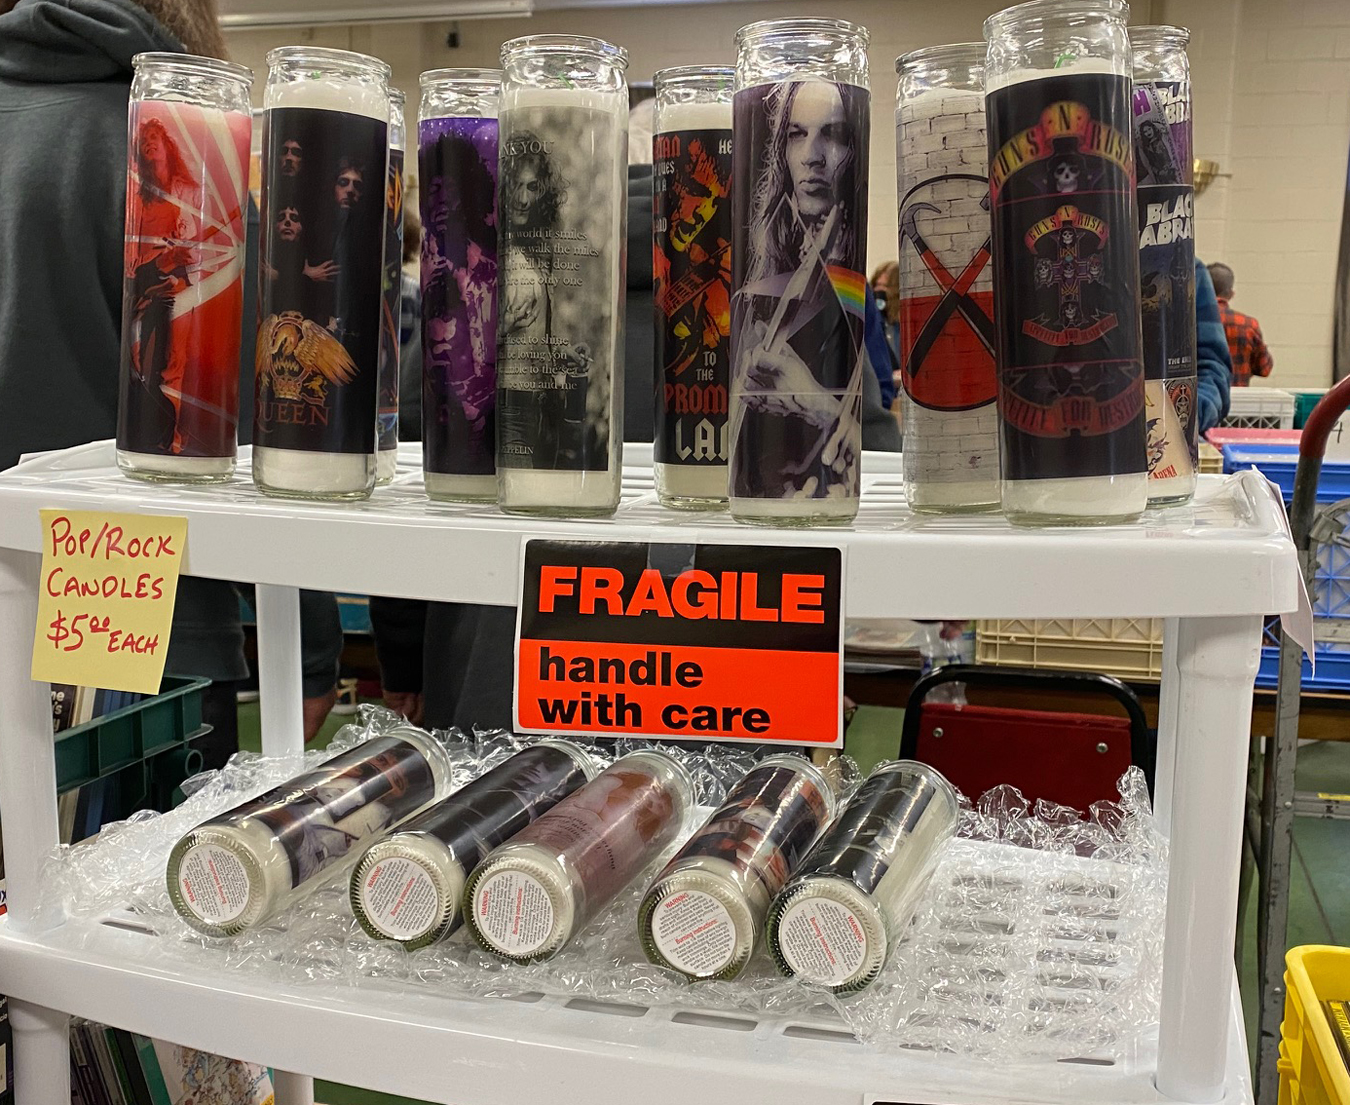 rock candles